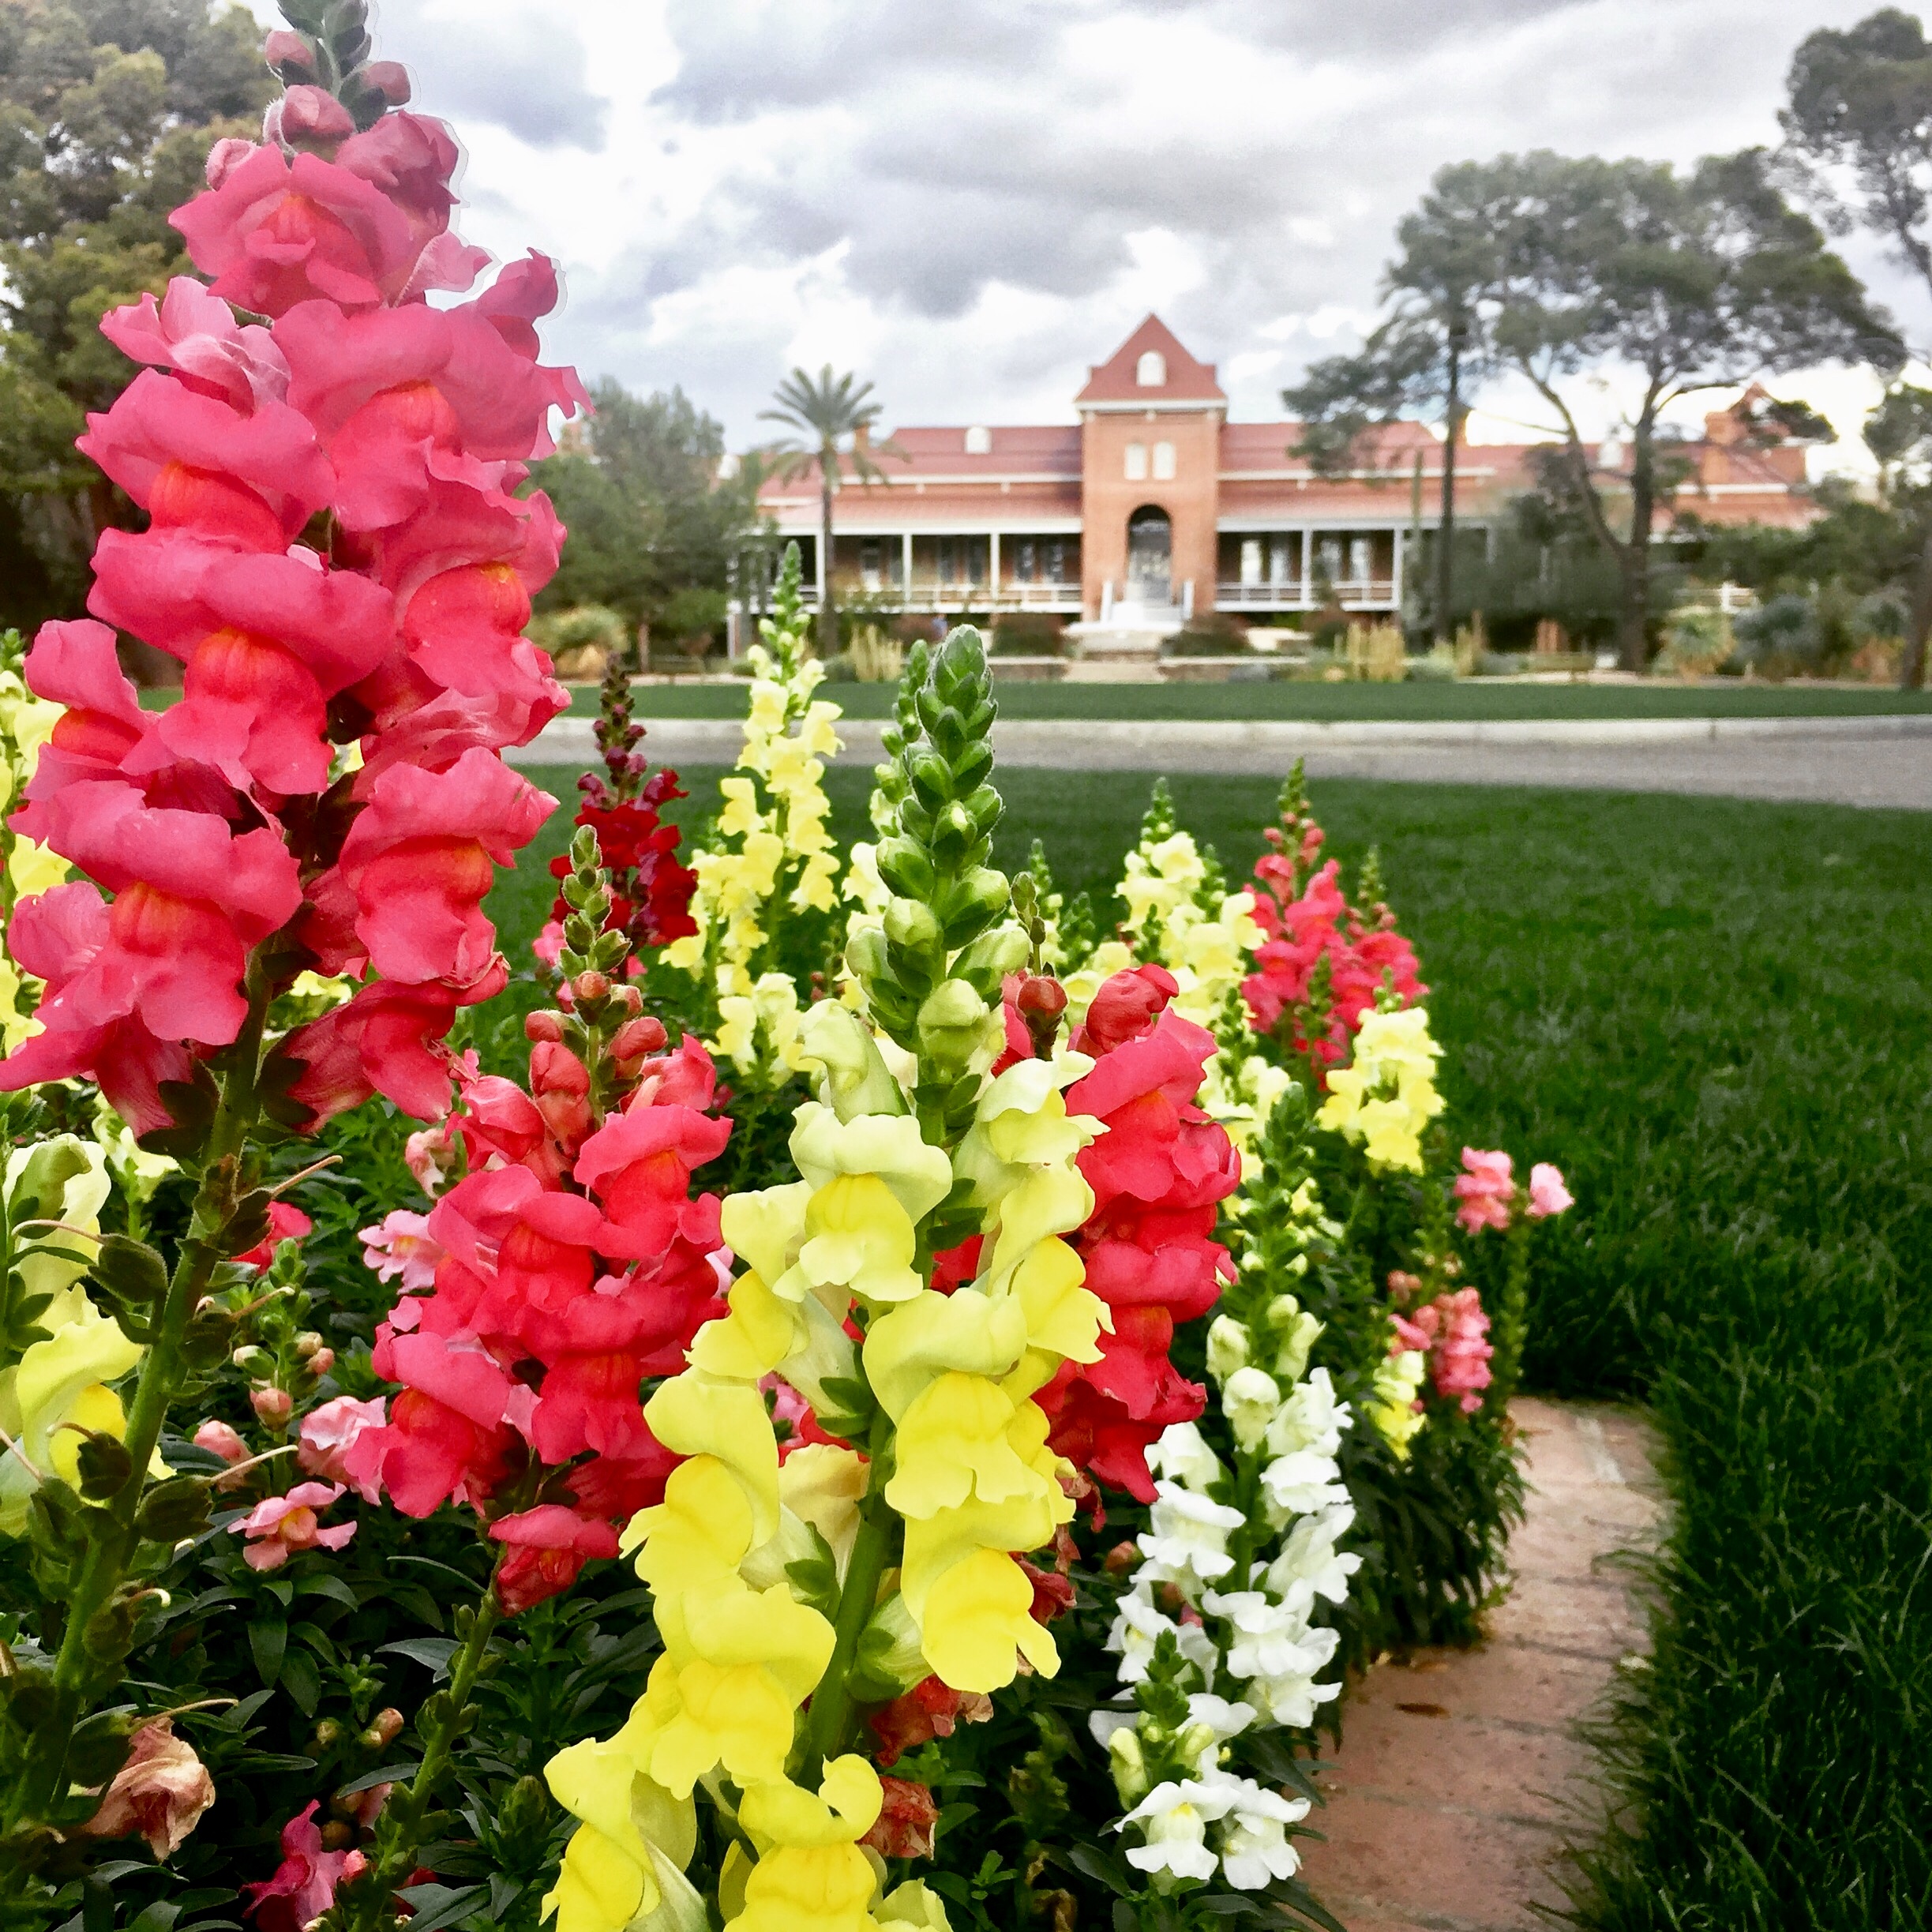 Spring flowers blooming in front of Old Main